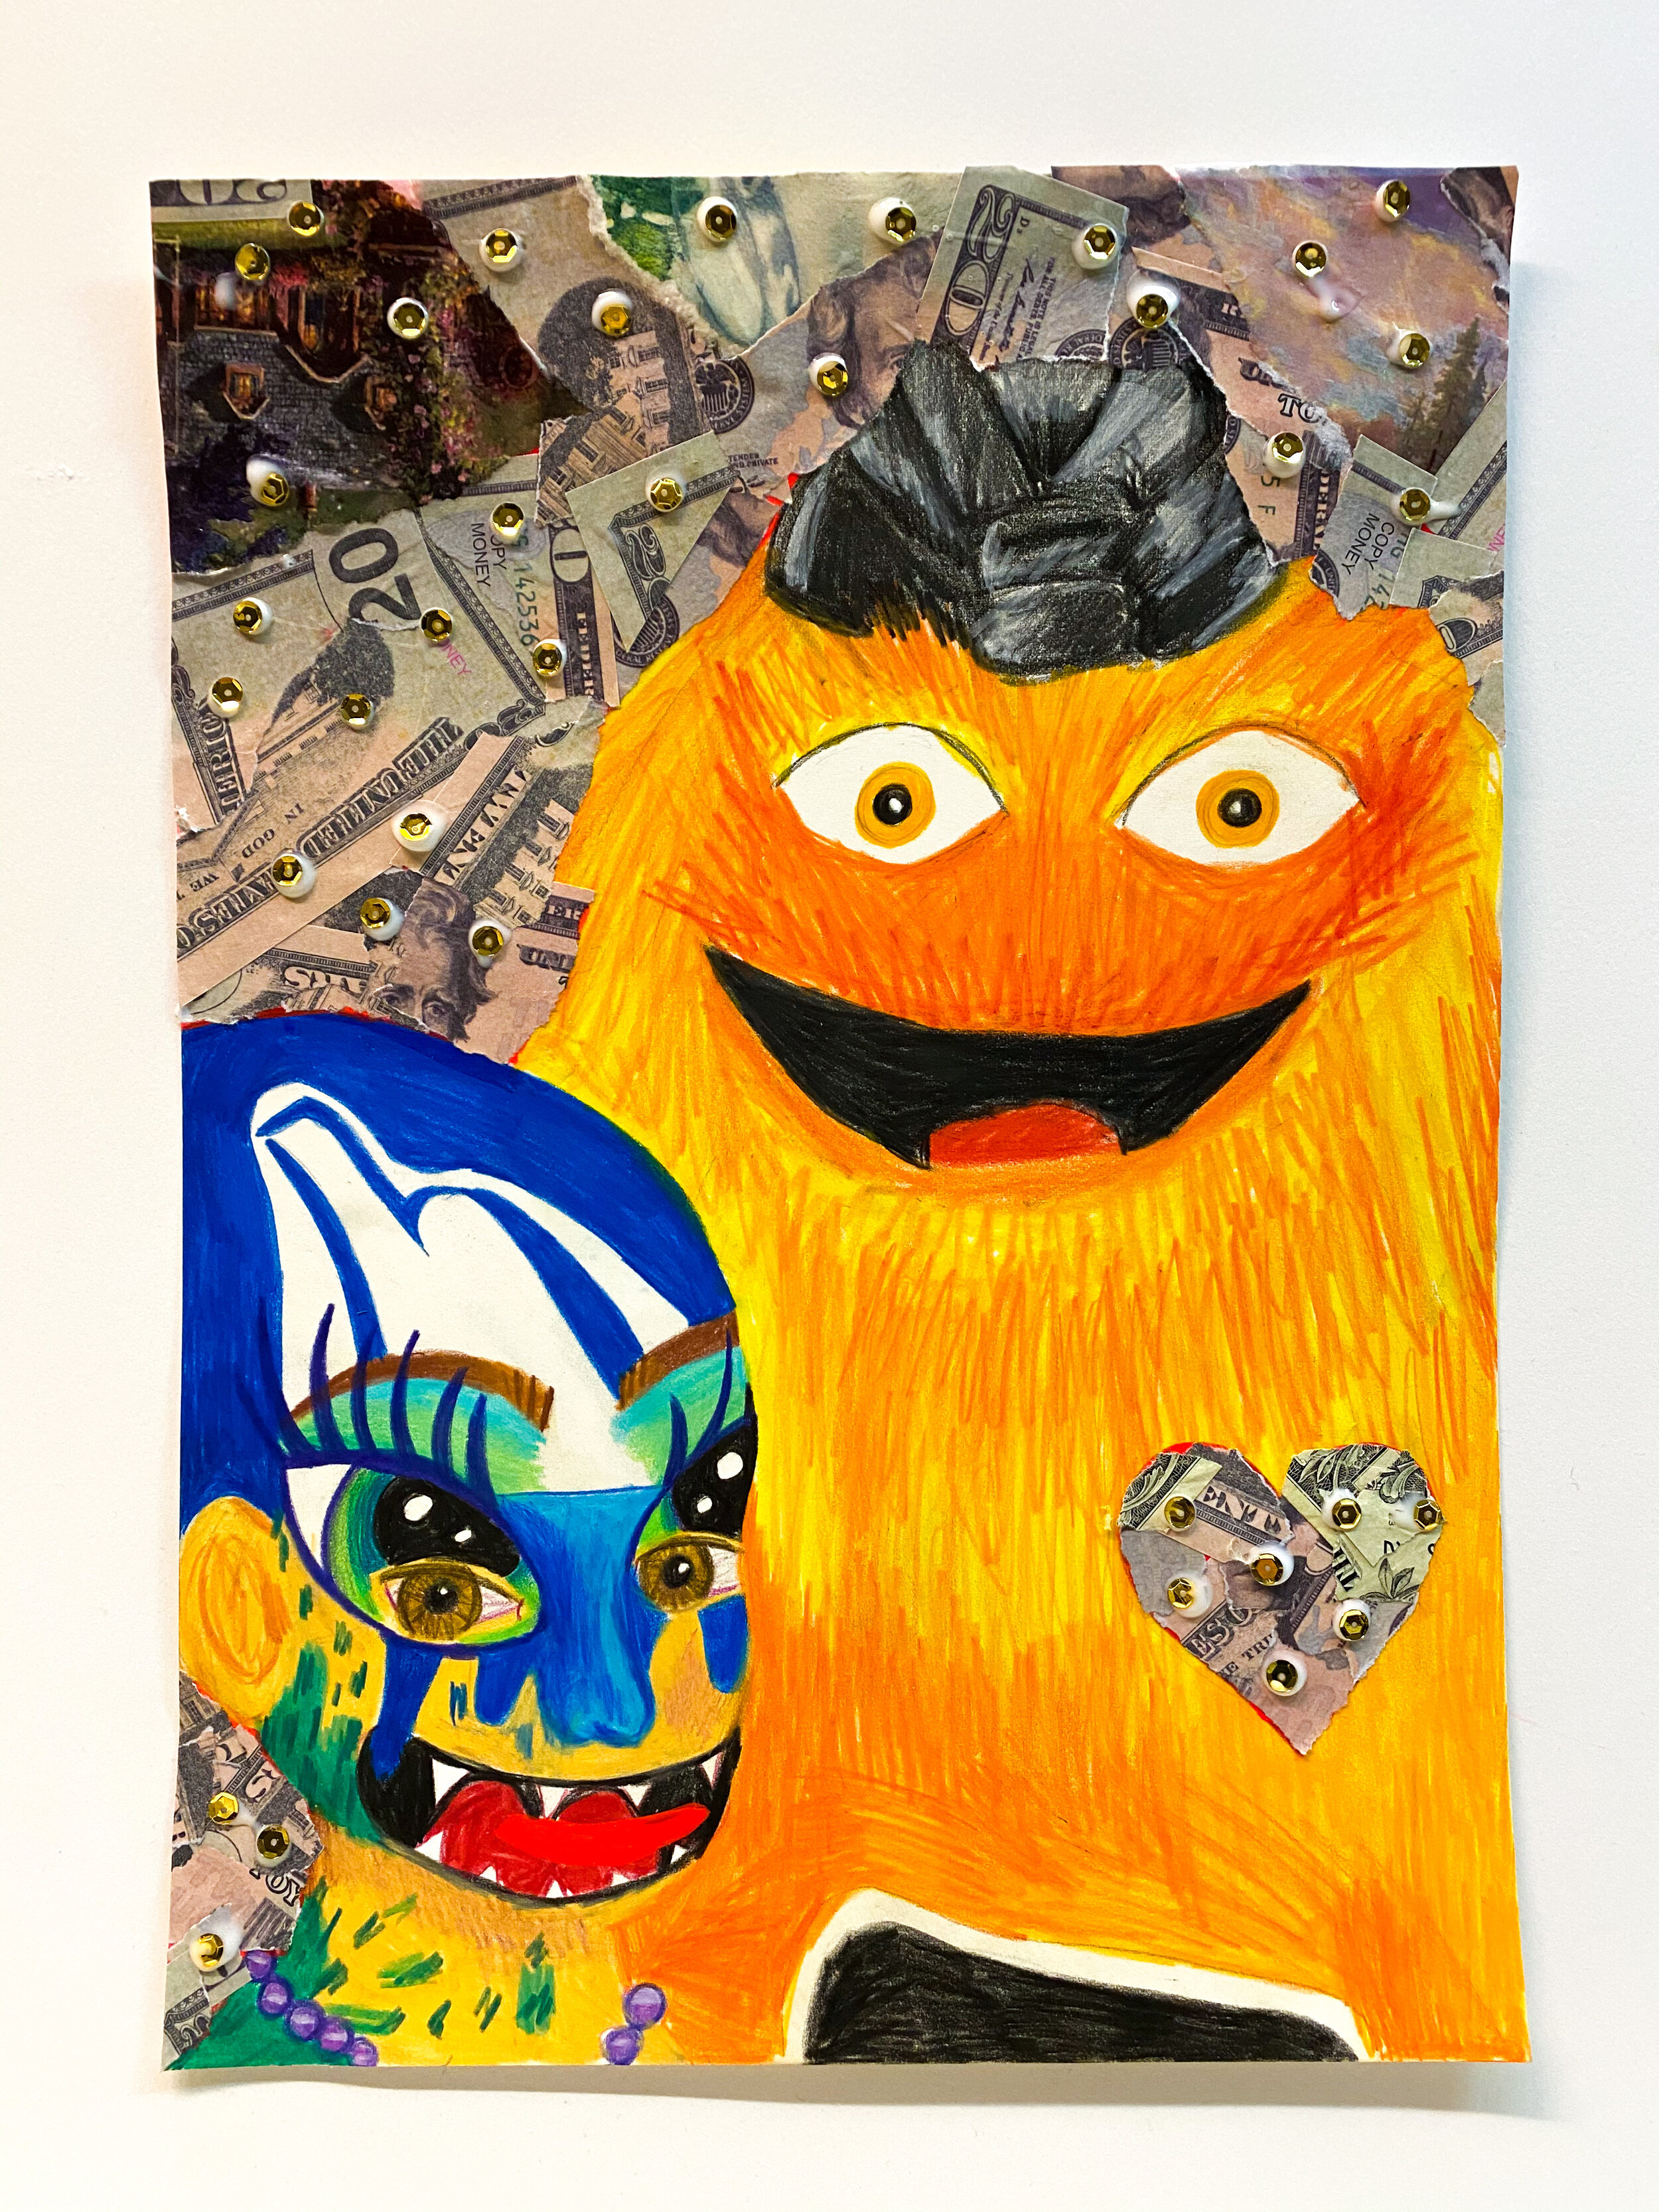  Gritty and Child with Postal Service Face Paint”, 2021  14 x 10 inches (35.56 x 25.4 cm.)  Colored pencil, acrylic paint, money, Thomas Kinkade print, Elmer's glue, Modge Podge, and gold sequins on paper  Private collection, Los Angeles  